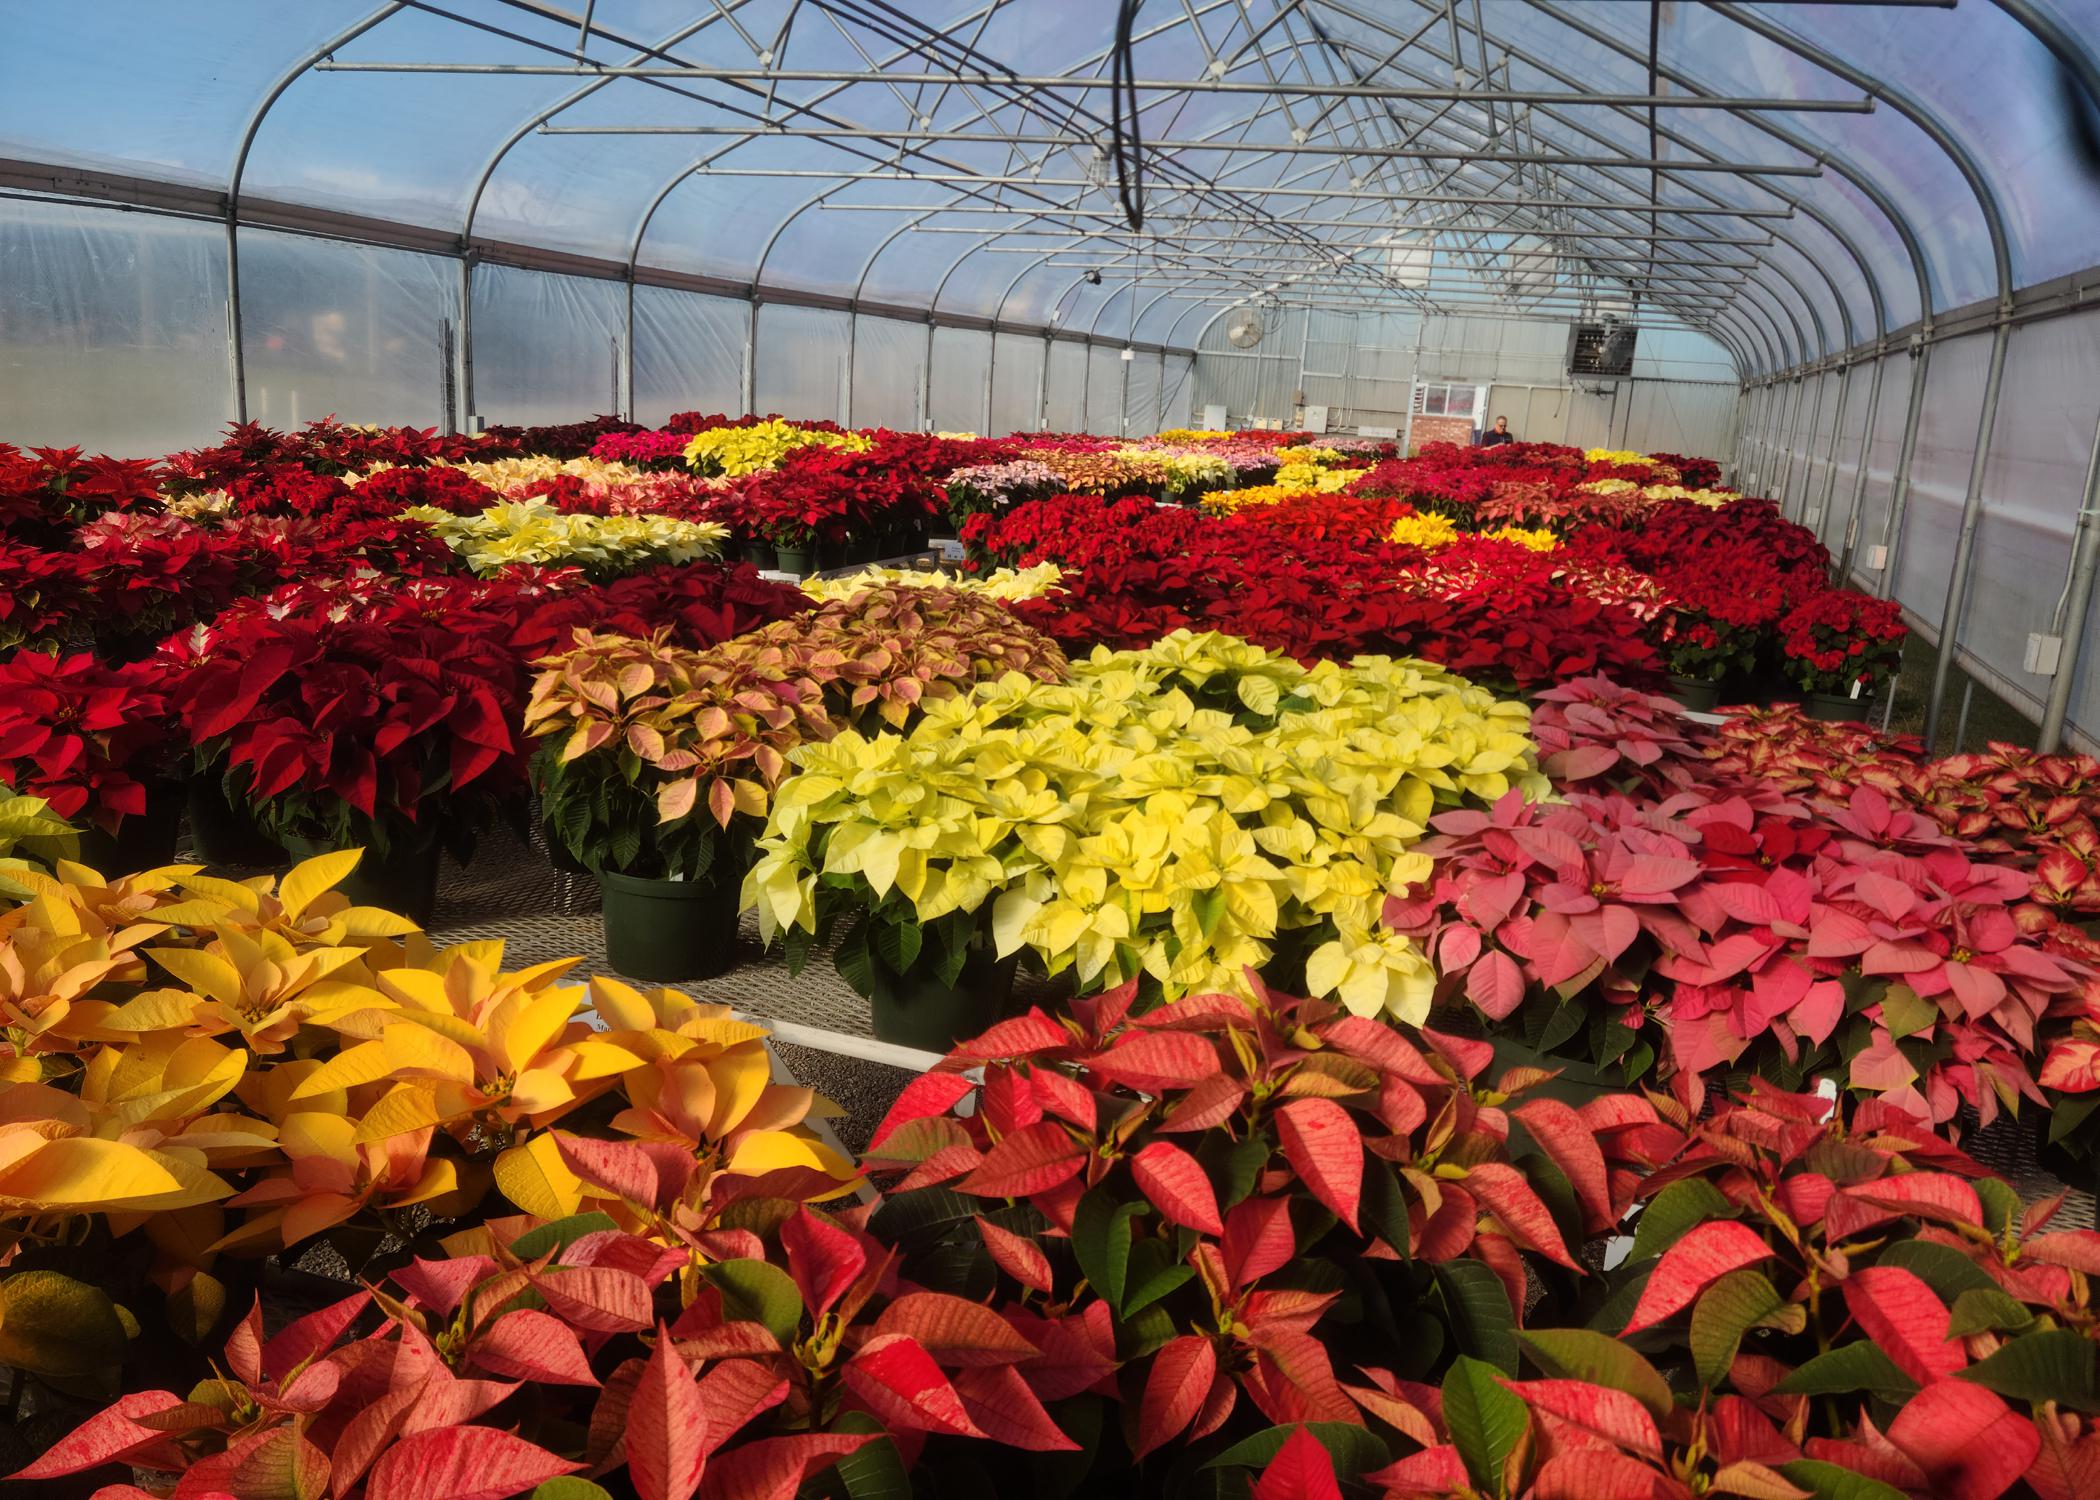 A greenhouse is full of poinsettias in a variety of red, yellow, orange and pink colors.